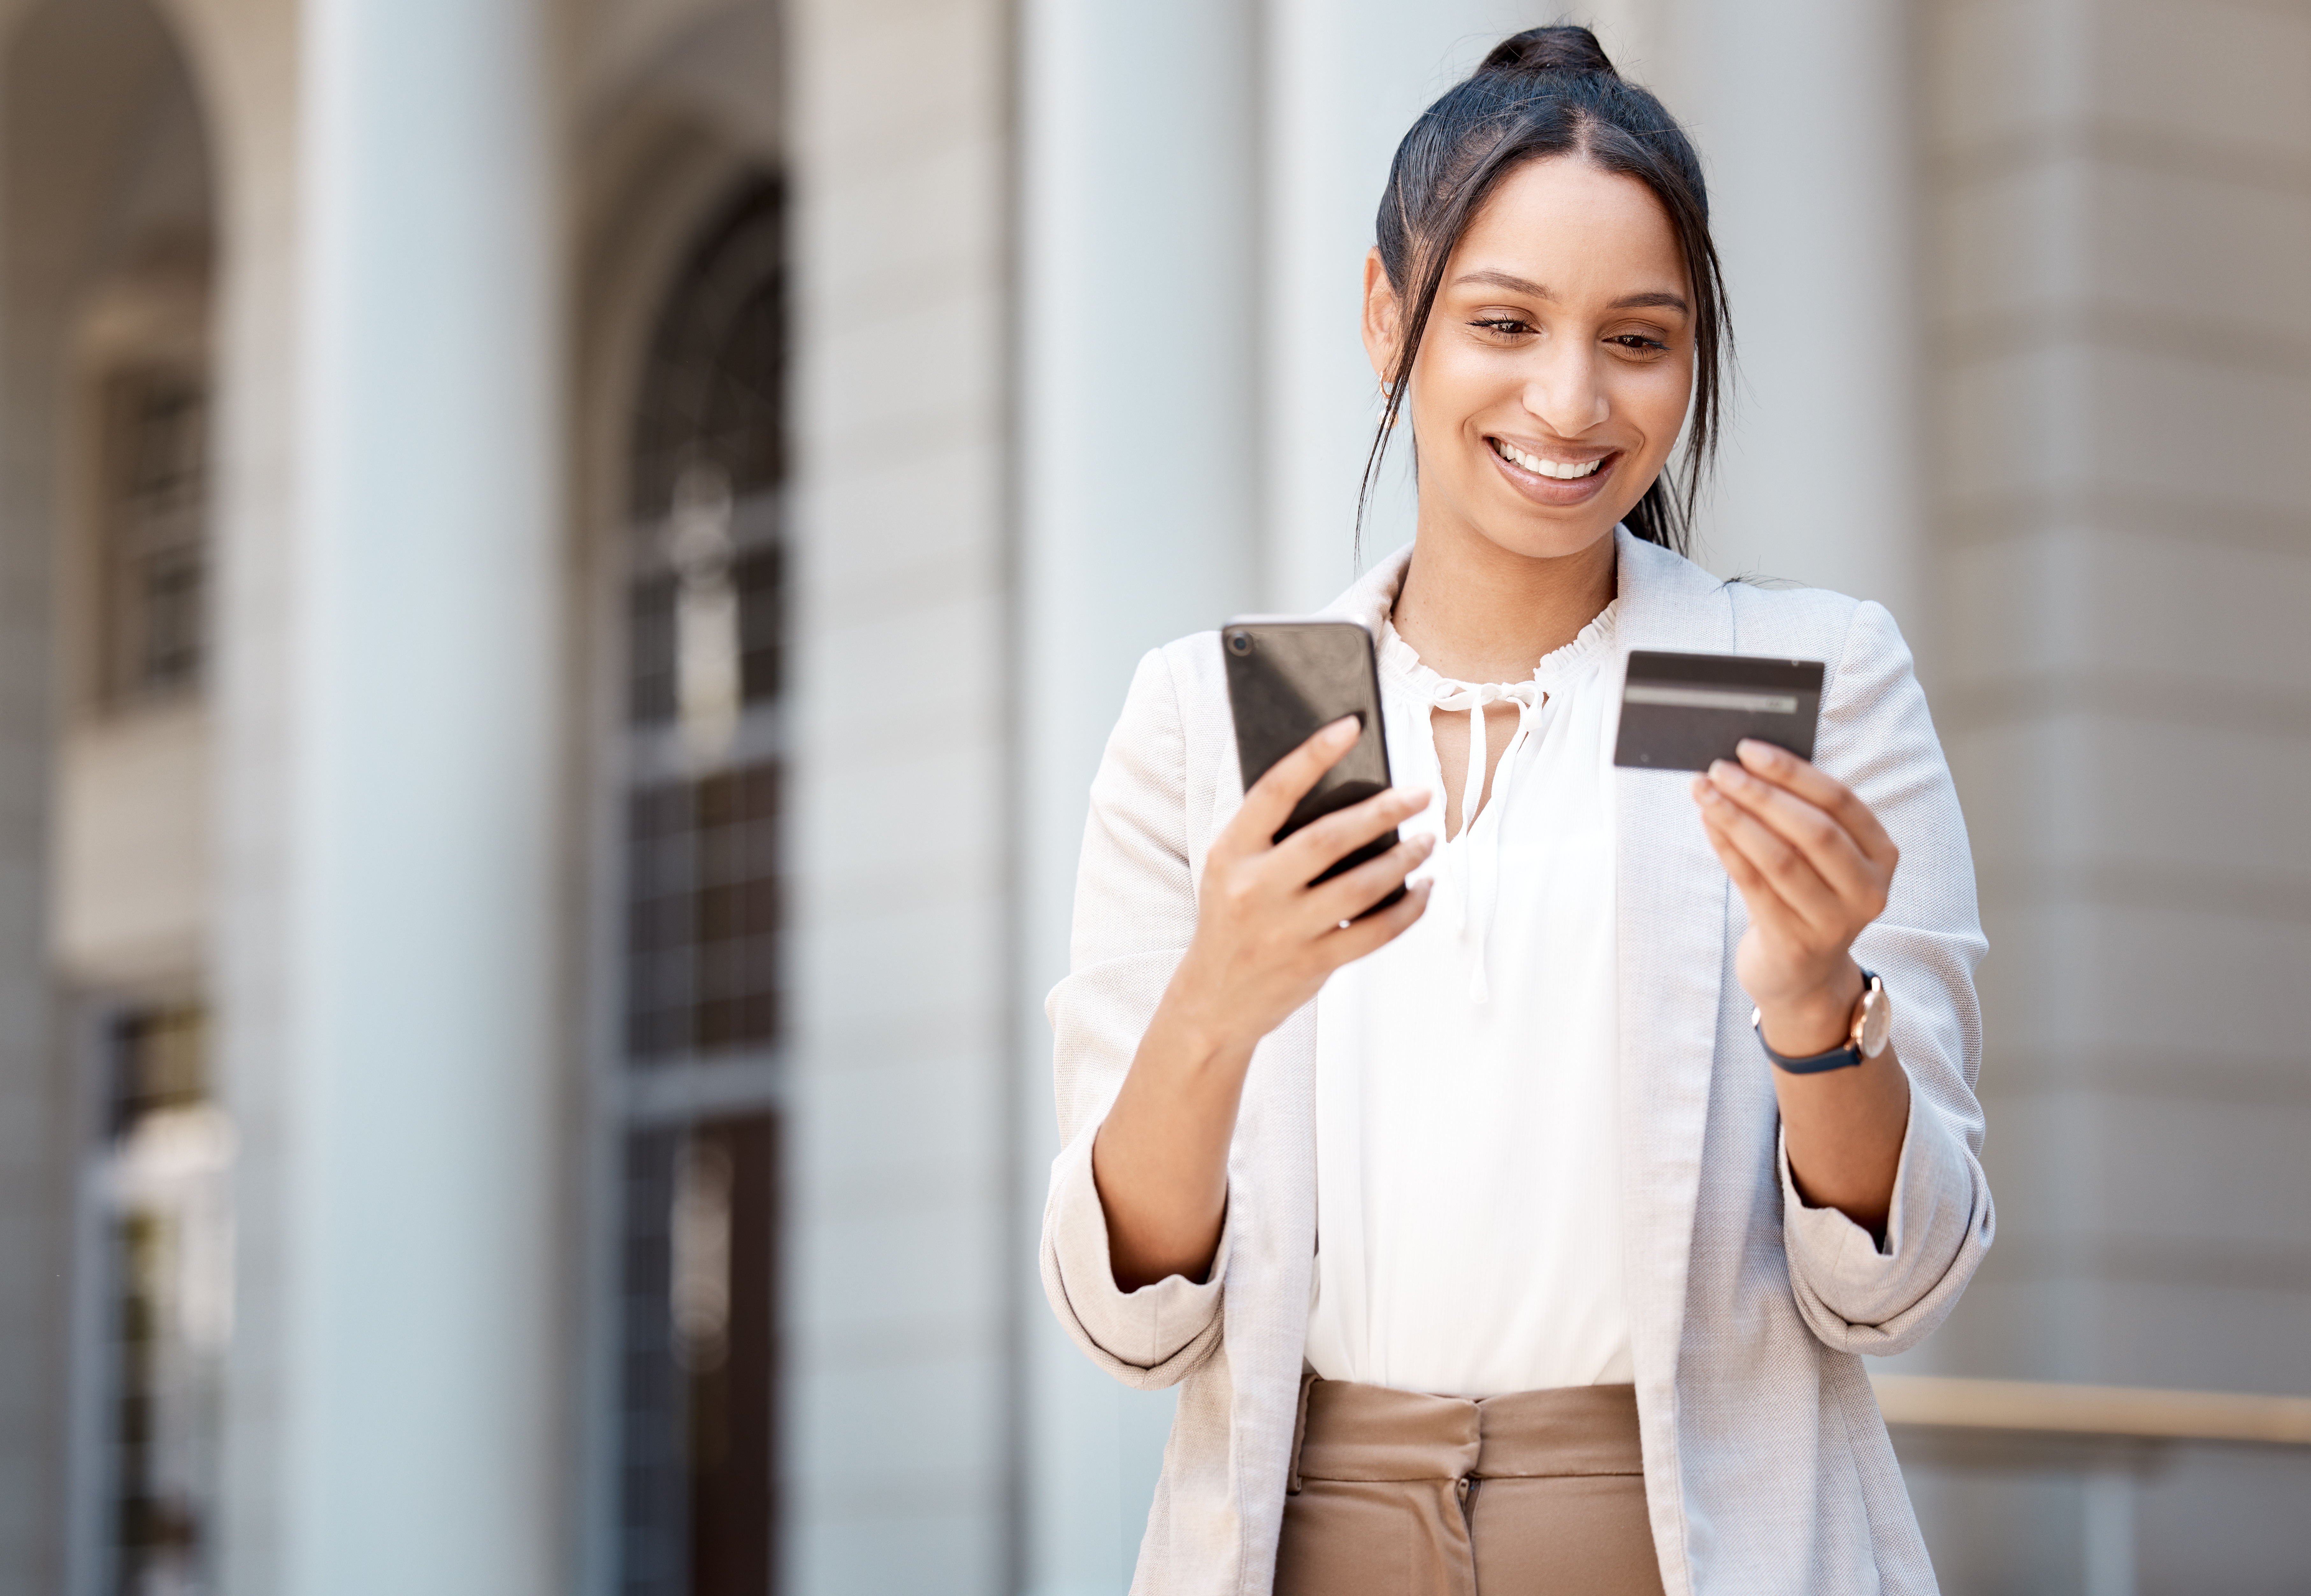 Why Customer Experience is the Key to Banking Success